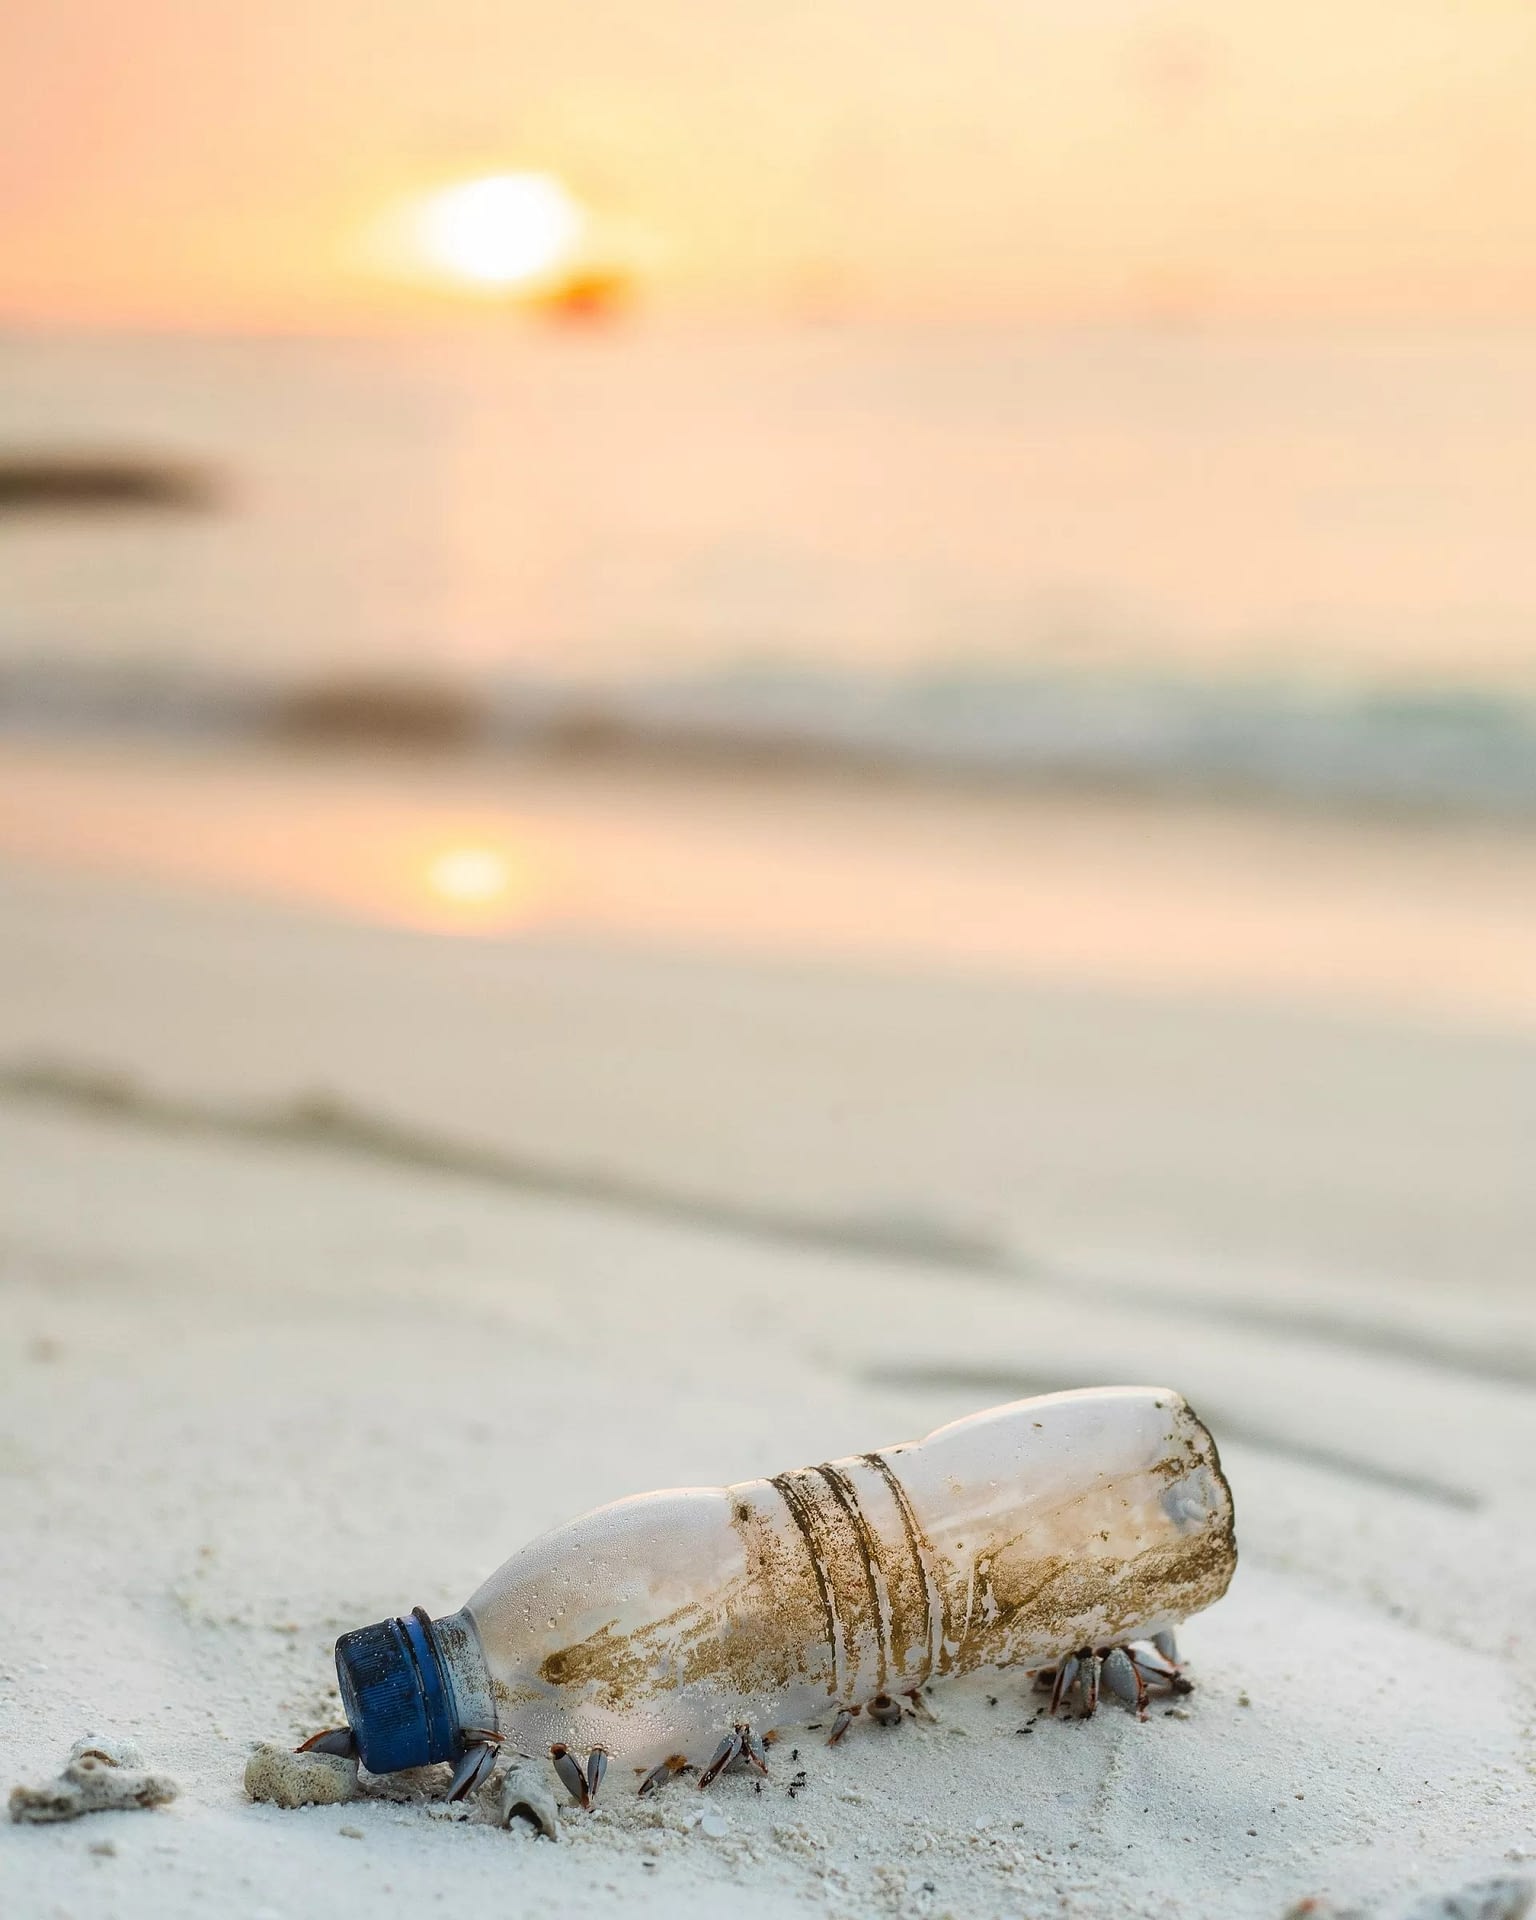 Where do we see plastics and its alternatives